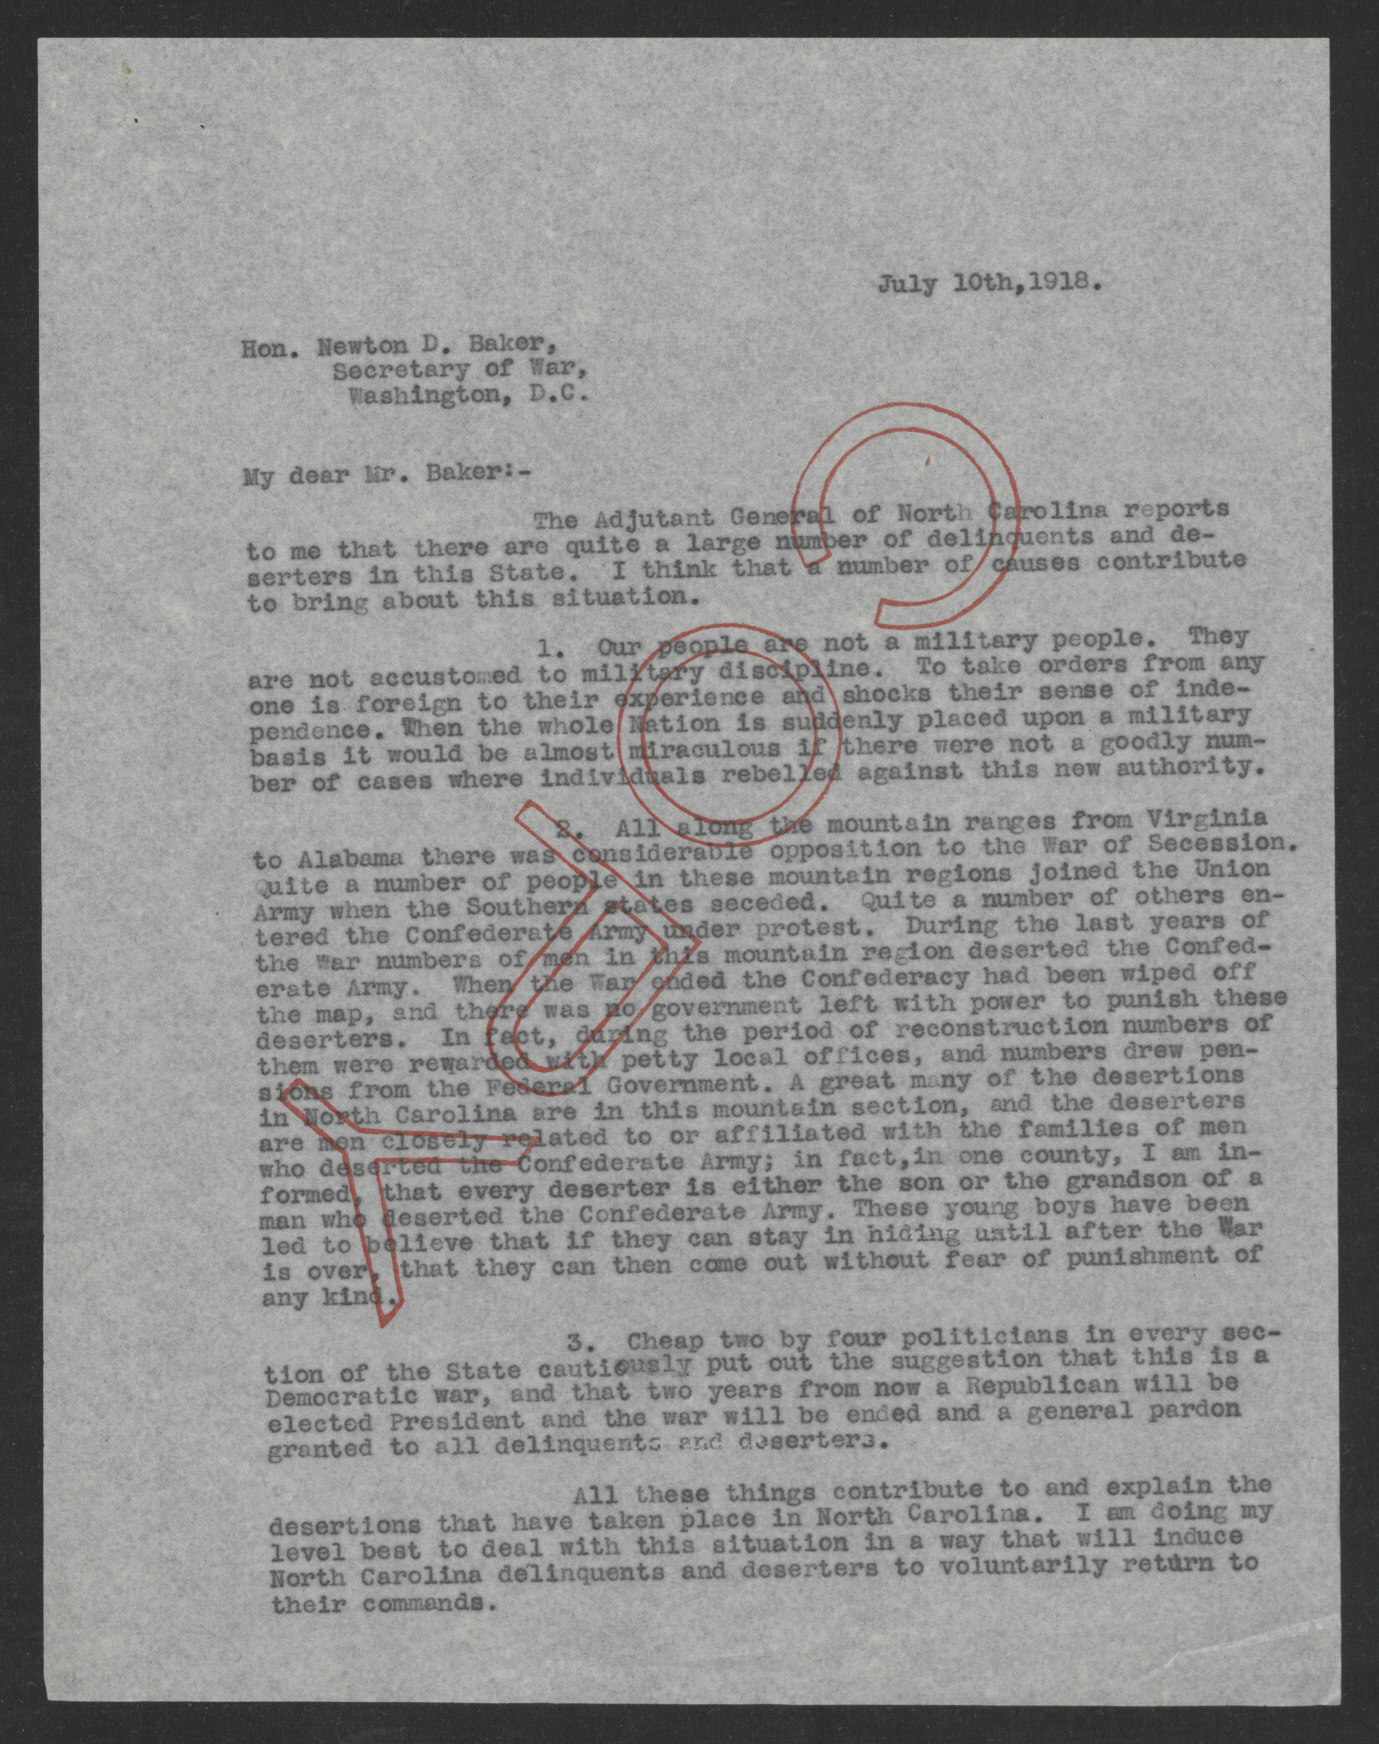 Letter from Thomas W. Bickett to Newton D. Baker, July 10, 1918, page 1